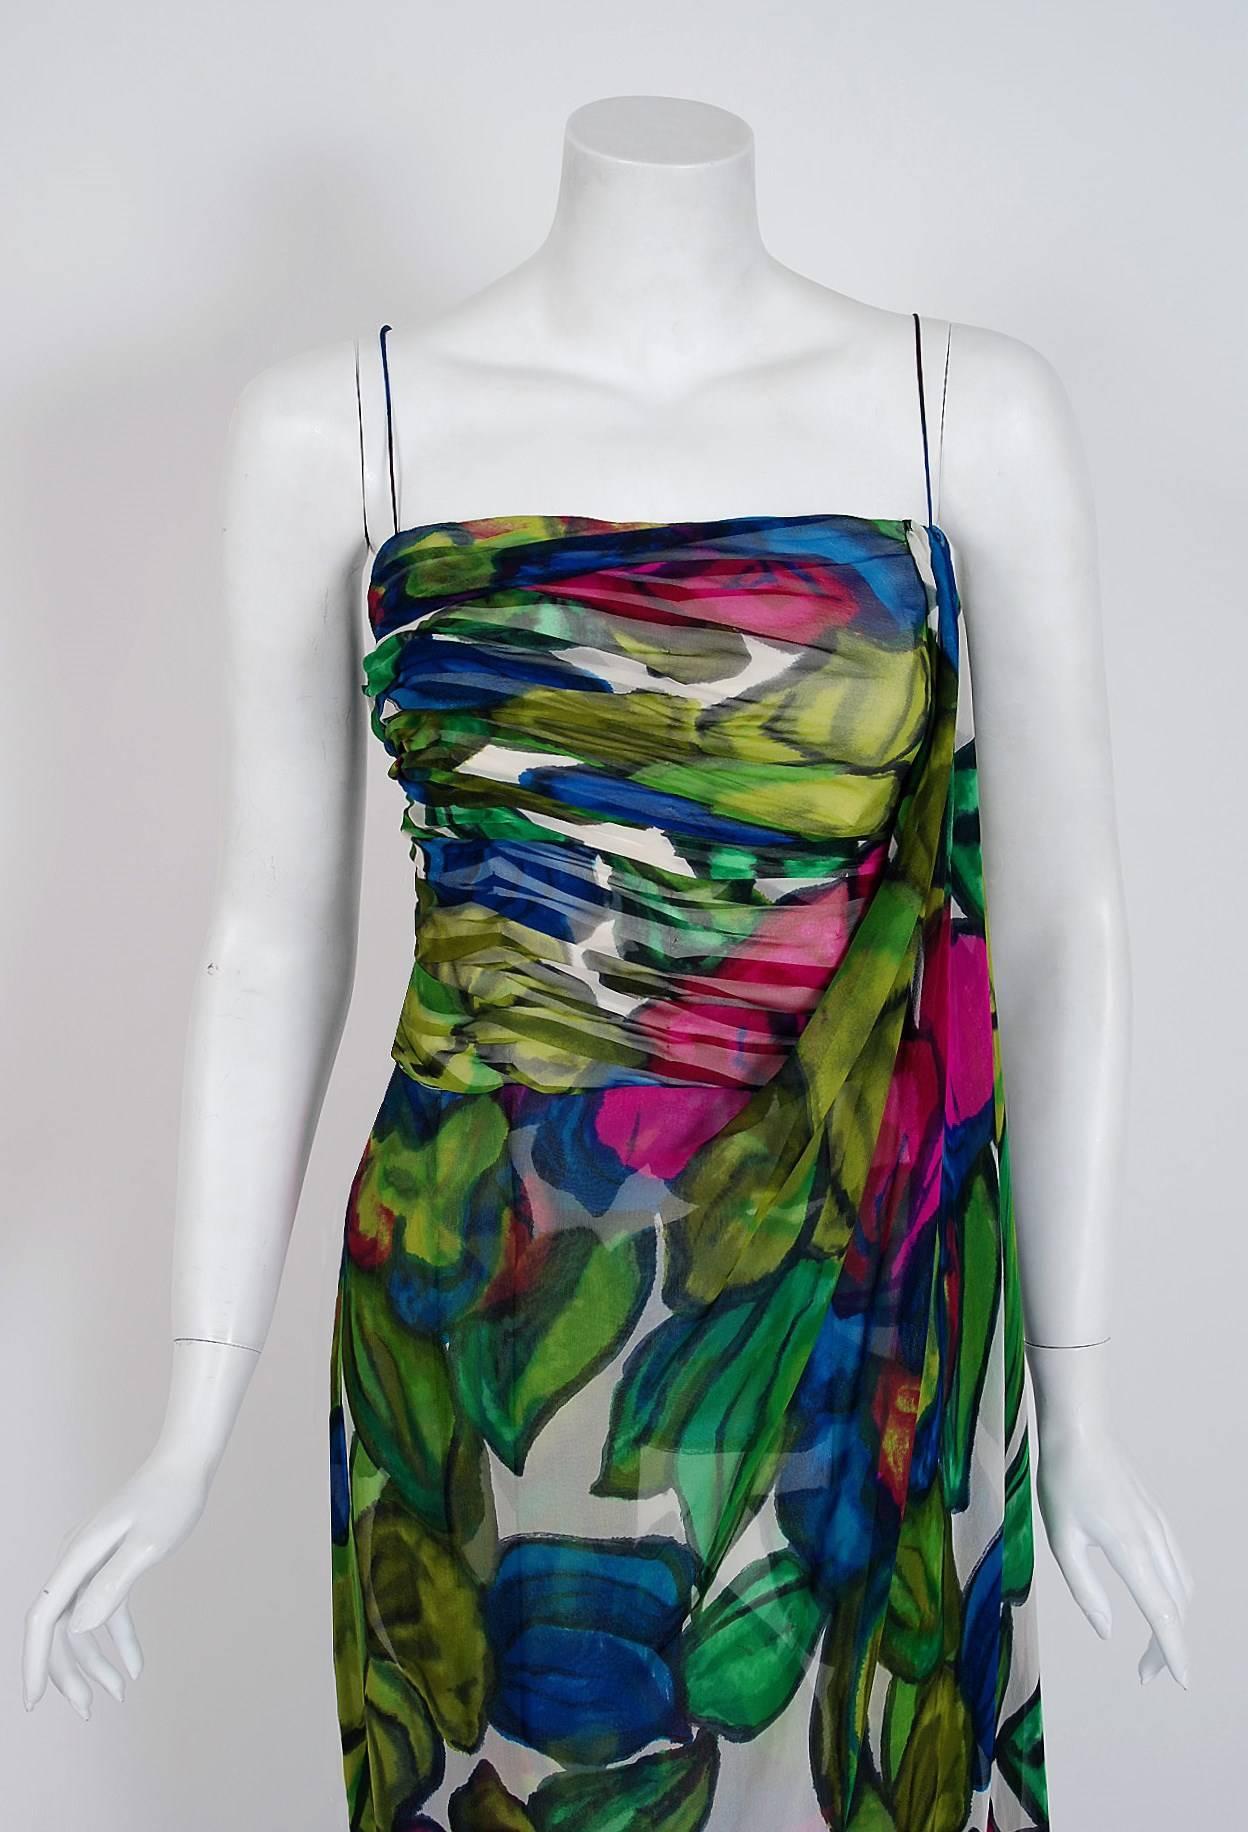 A breathtaking gown by the famous American designer, Will Steinman. The vibrant large-scale watercolor floral print used in this garment has a fresh modern vibe that I find irresistible. The bodice is a seductive thin-strap plunge with flattering